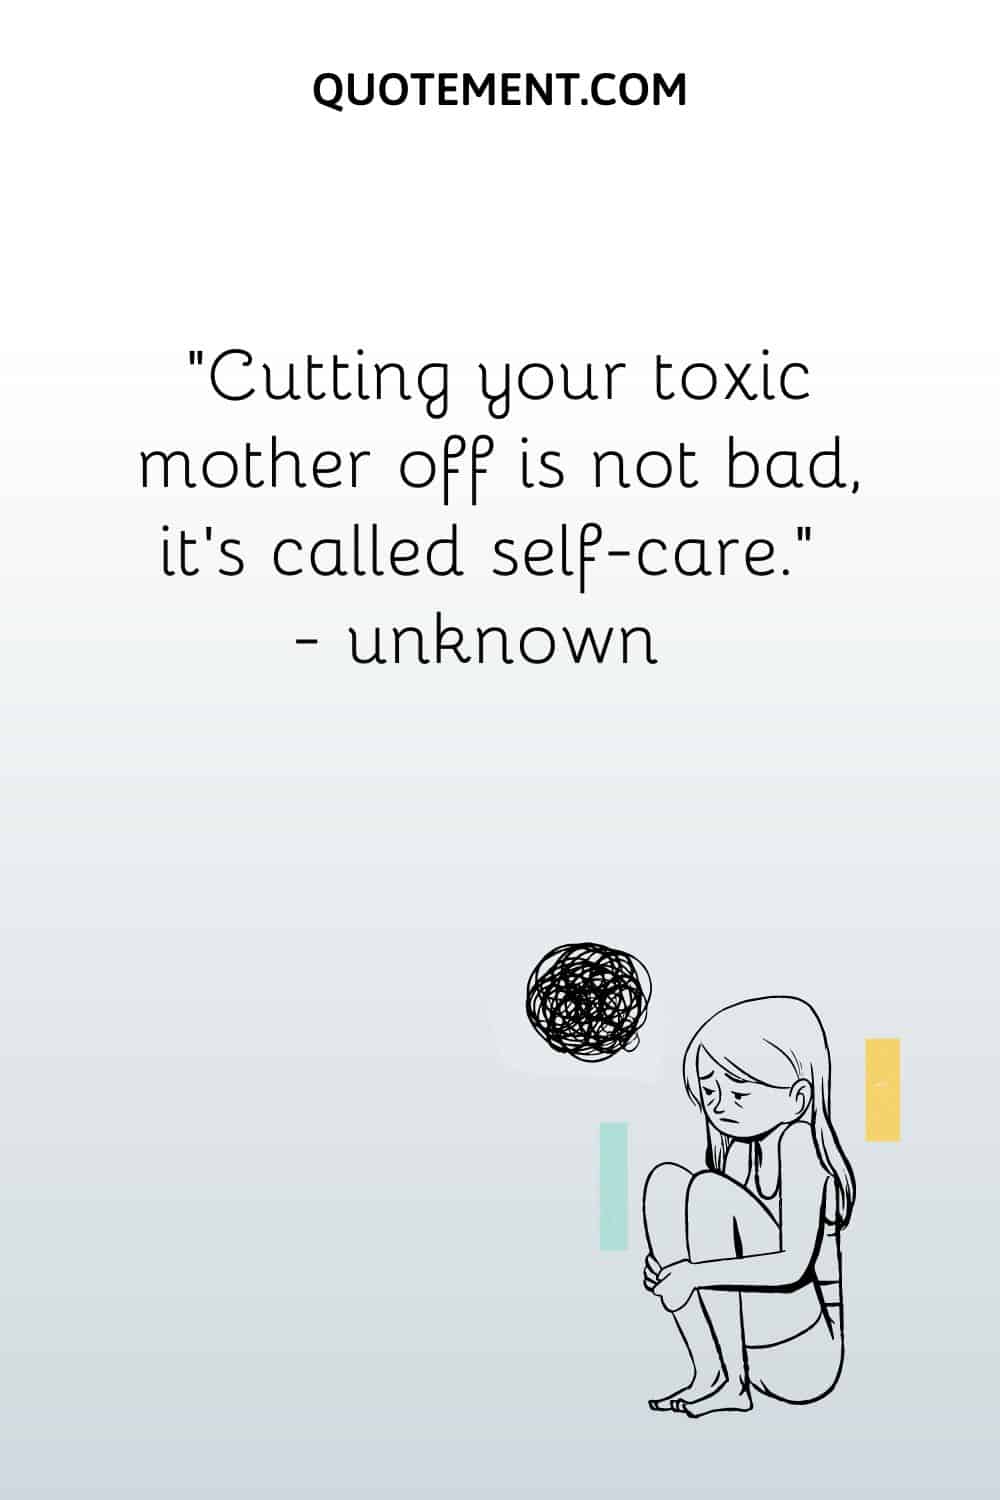 Cutting your toxic mother off is not bad